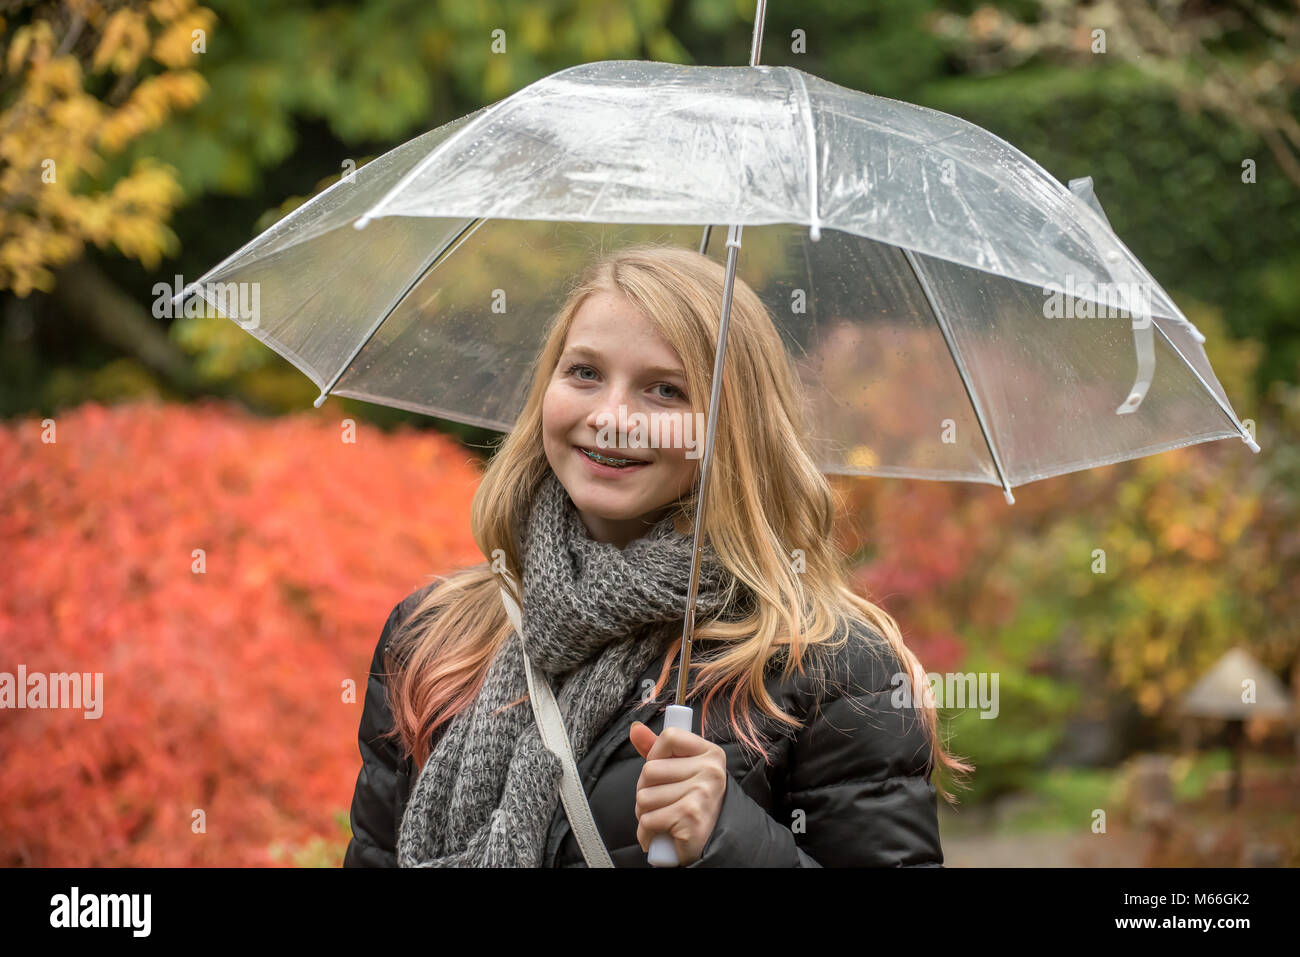 Smiling girl standing in the rain under an umbrella Stock Photo